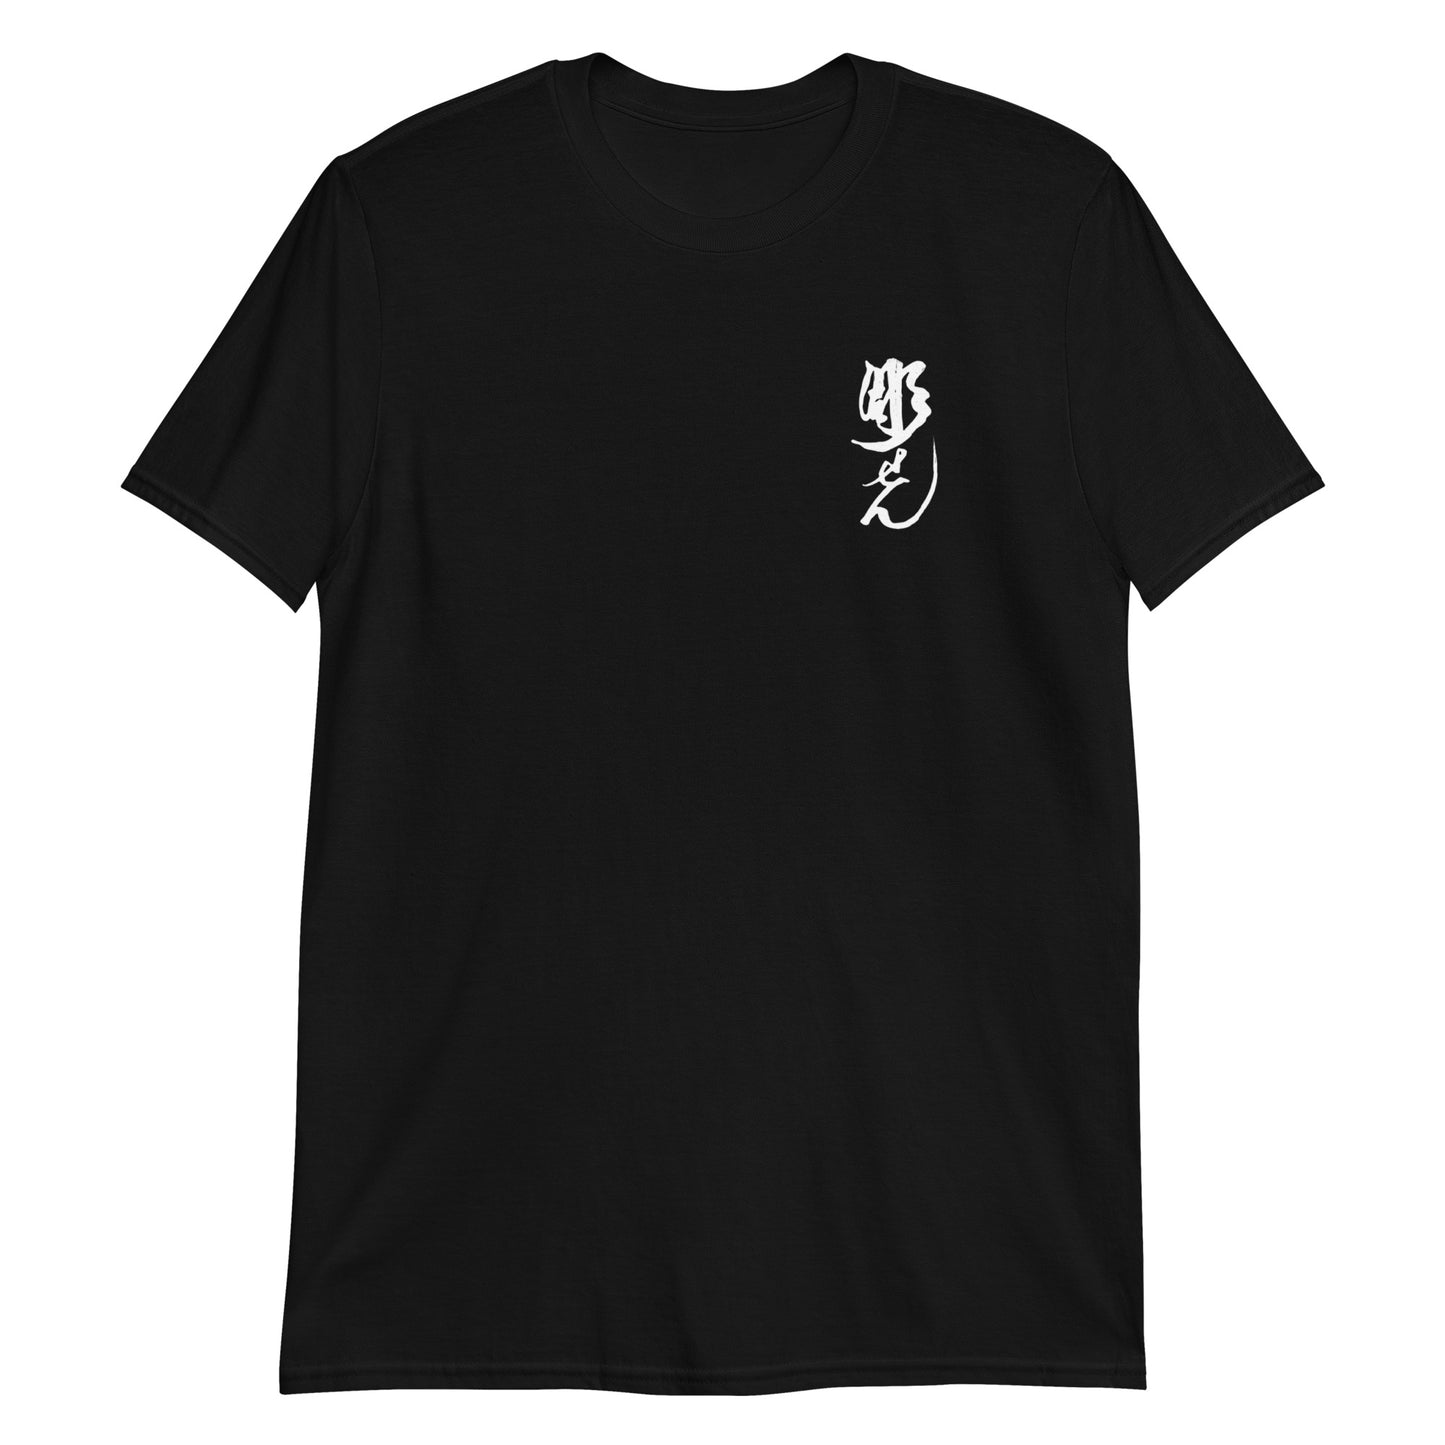 “Fight till you die” - Gaman Toad Short-Sleeve Unisex T-Shirt (black)